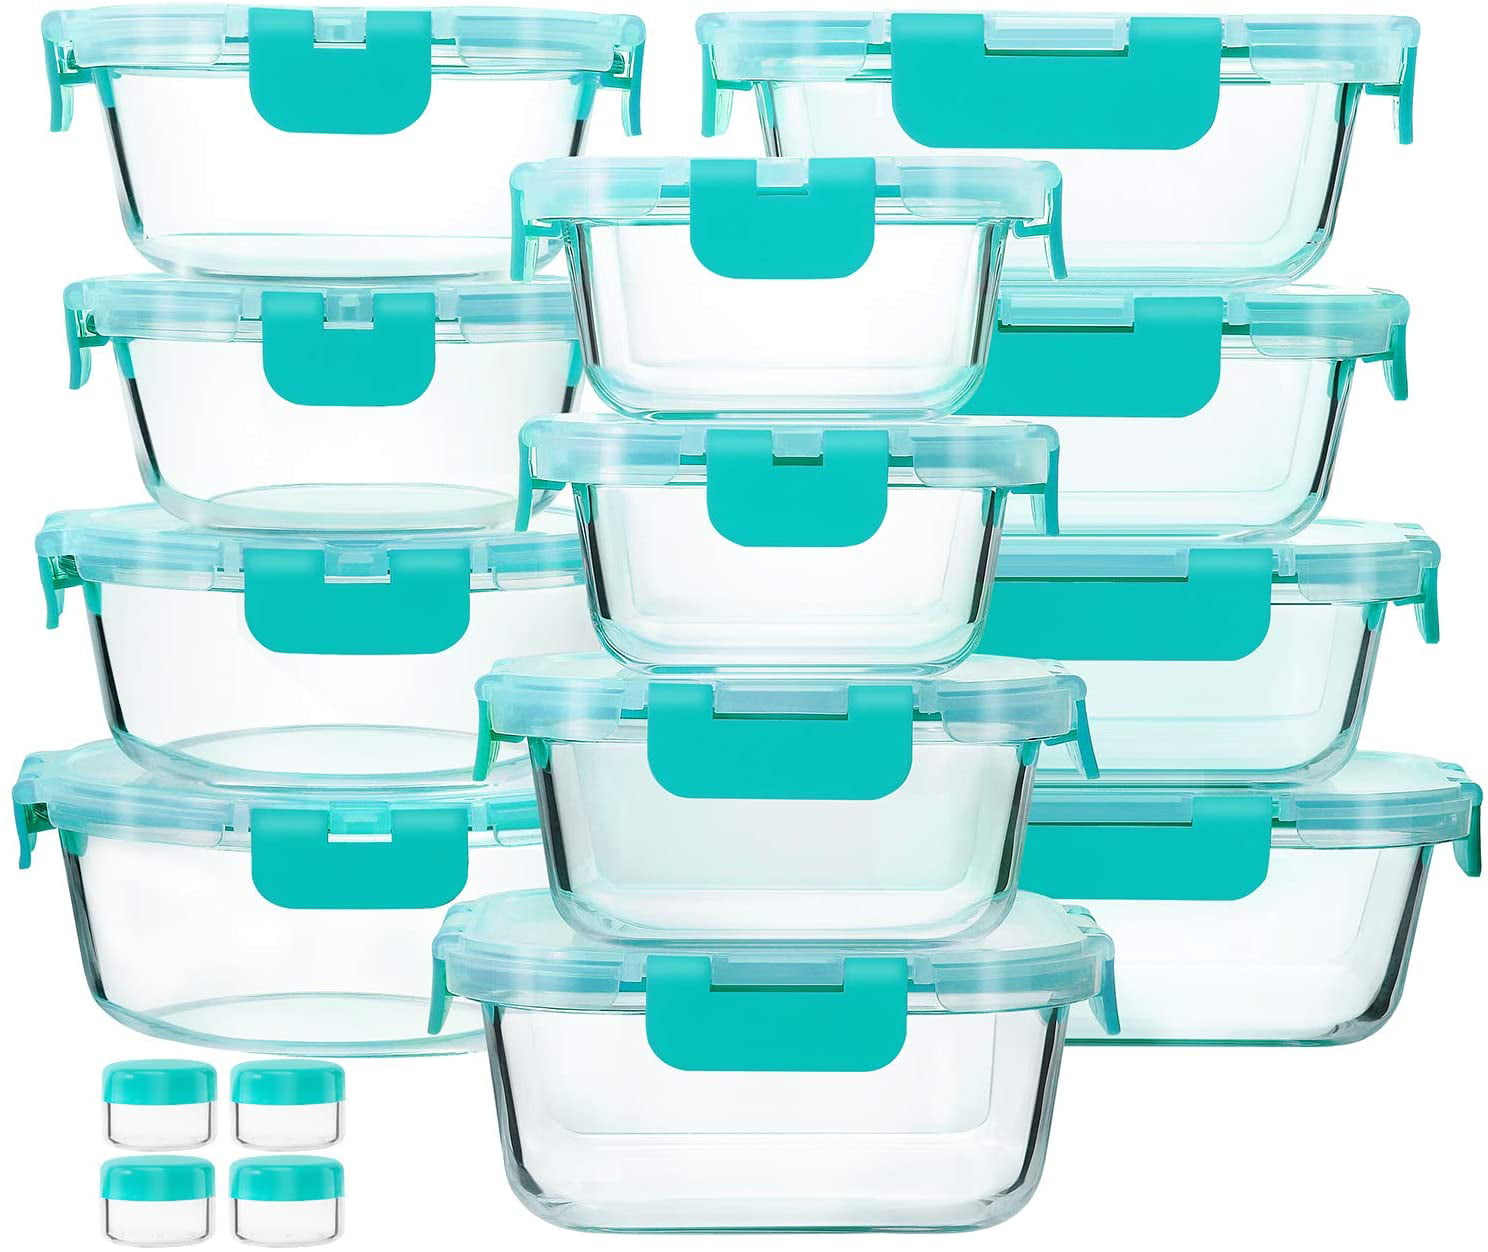 M MCIRCO [12-Pack, 5oz] Small Glass Food Storage Containers with Lids, Jars  for Snacks, Dips, Sauces, BPA Free, Freezer, Microwave & Dishwasher